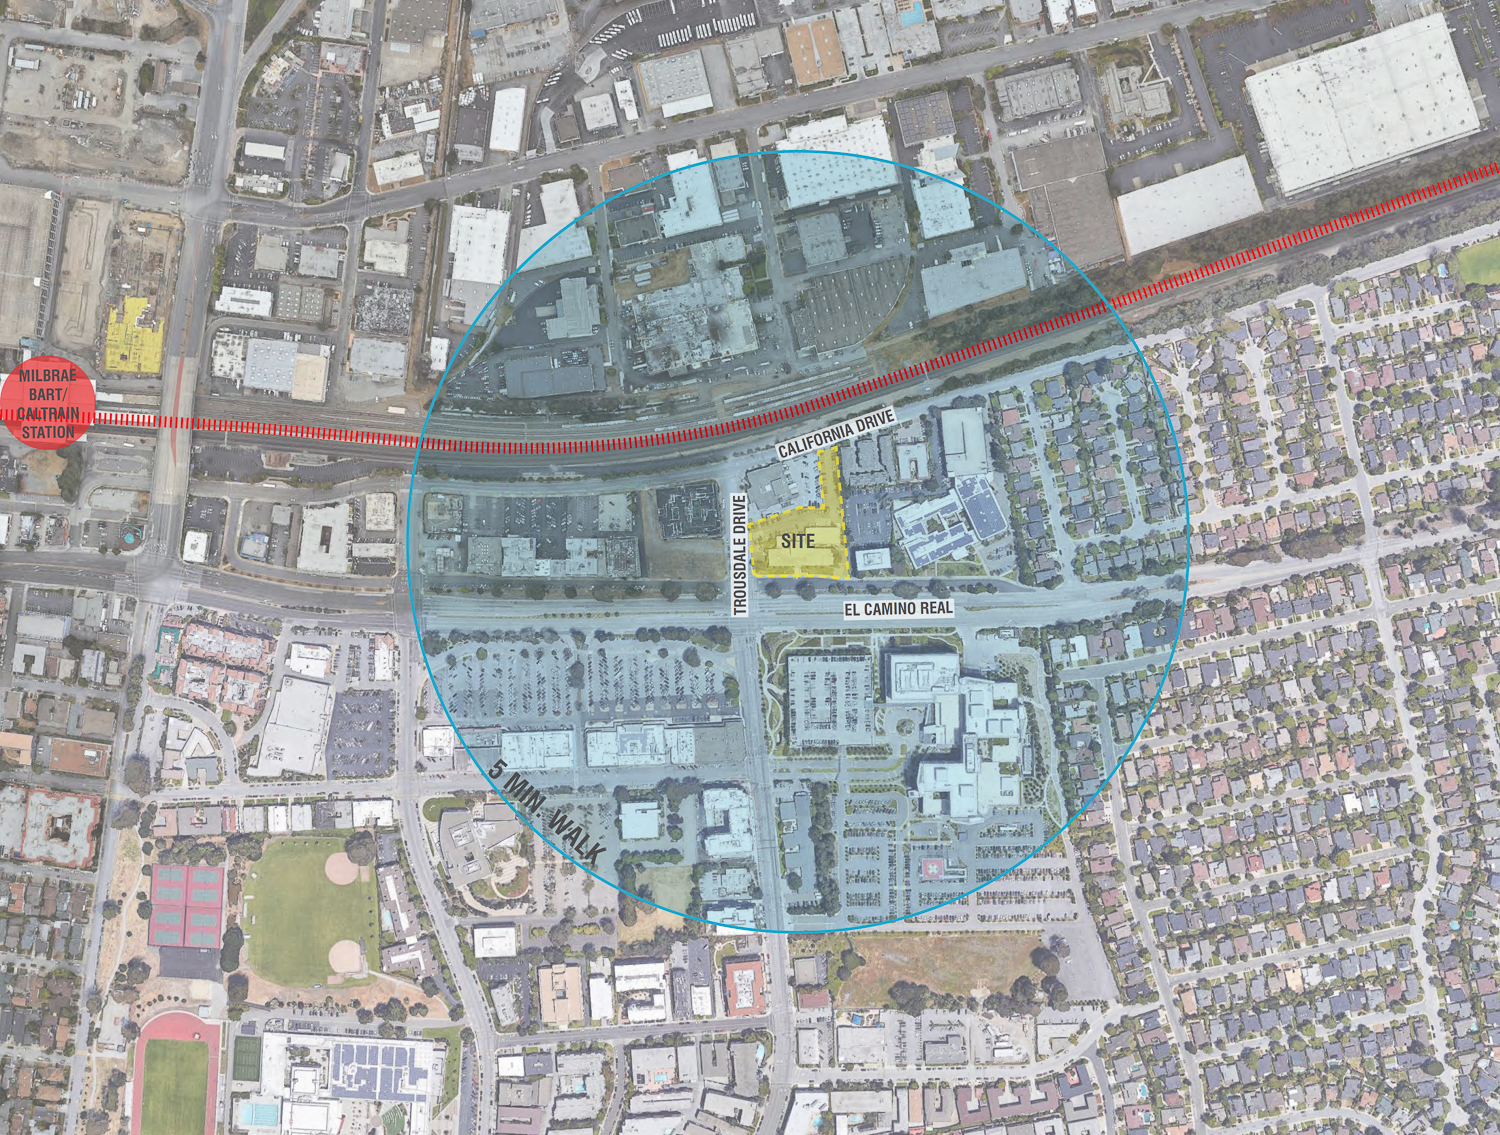 1766 El Camino Real site context, map by TCA Architects